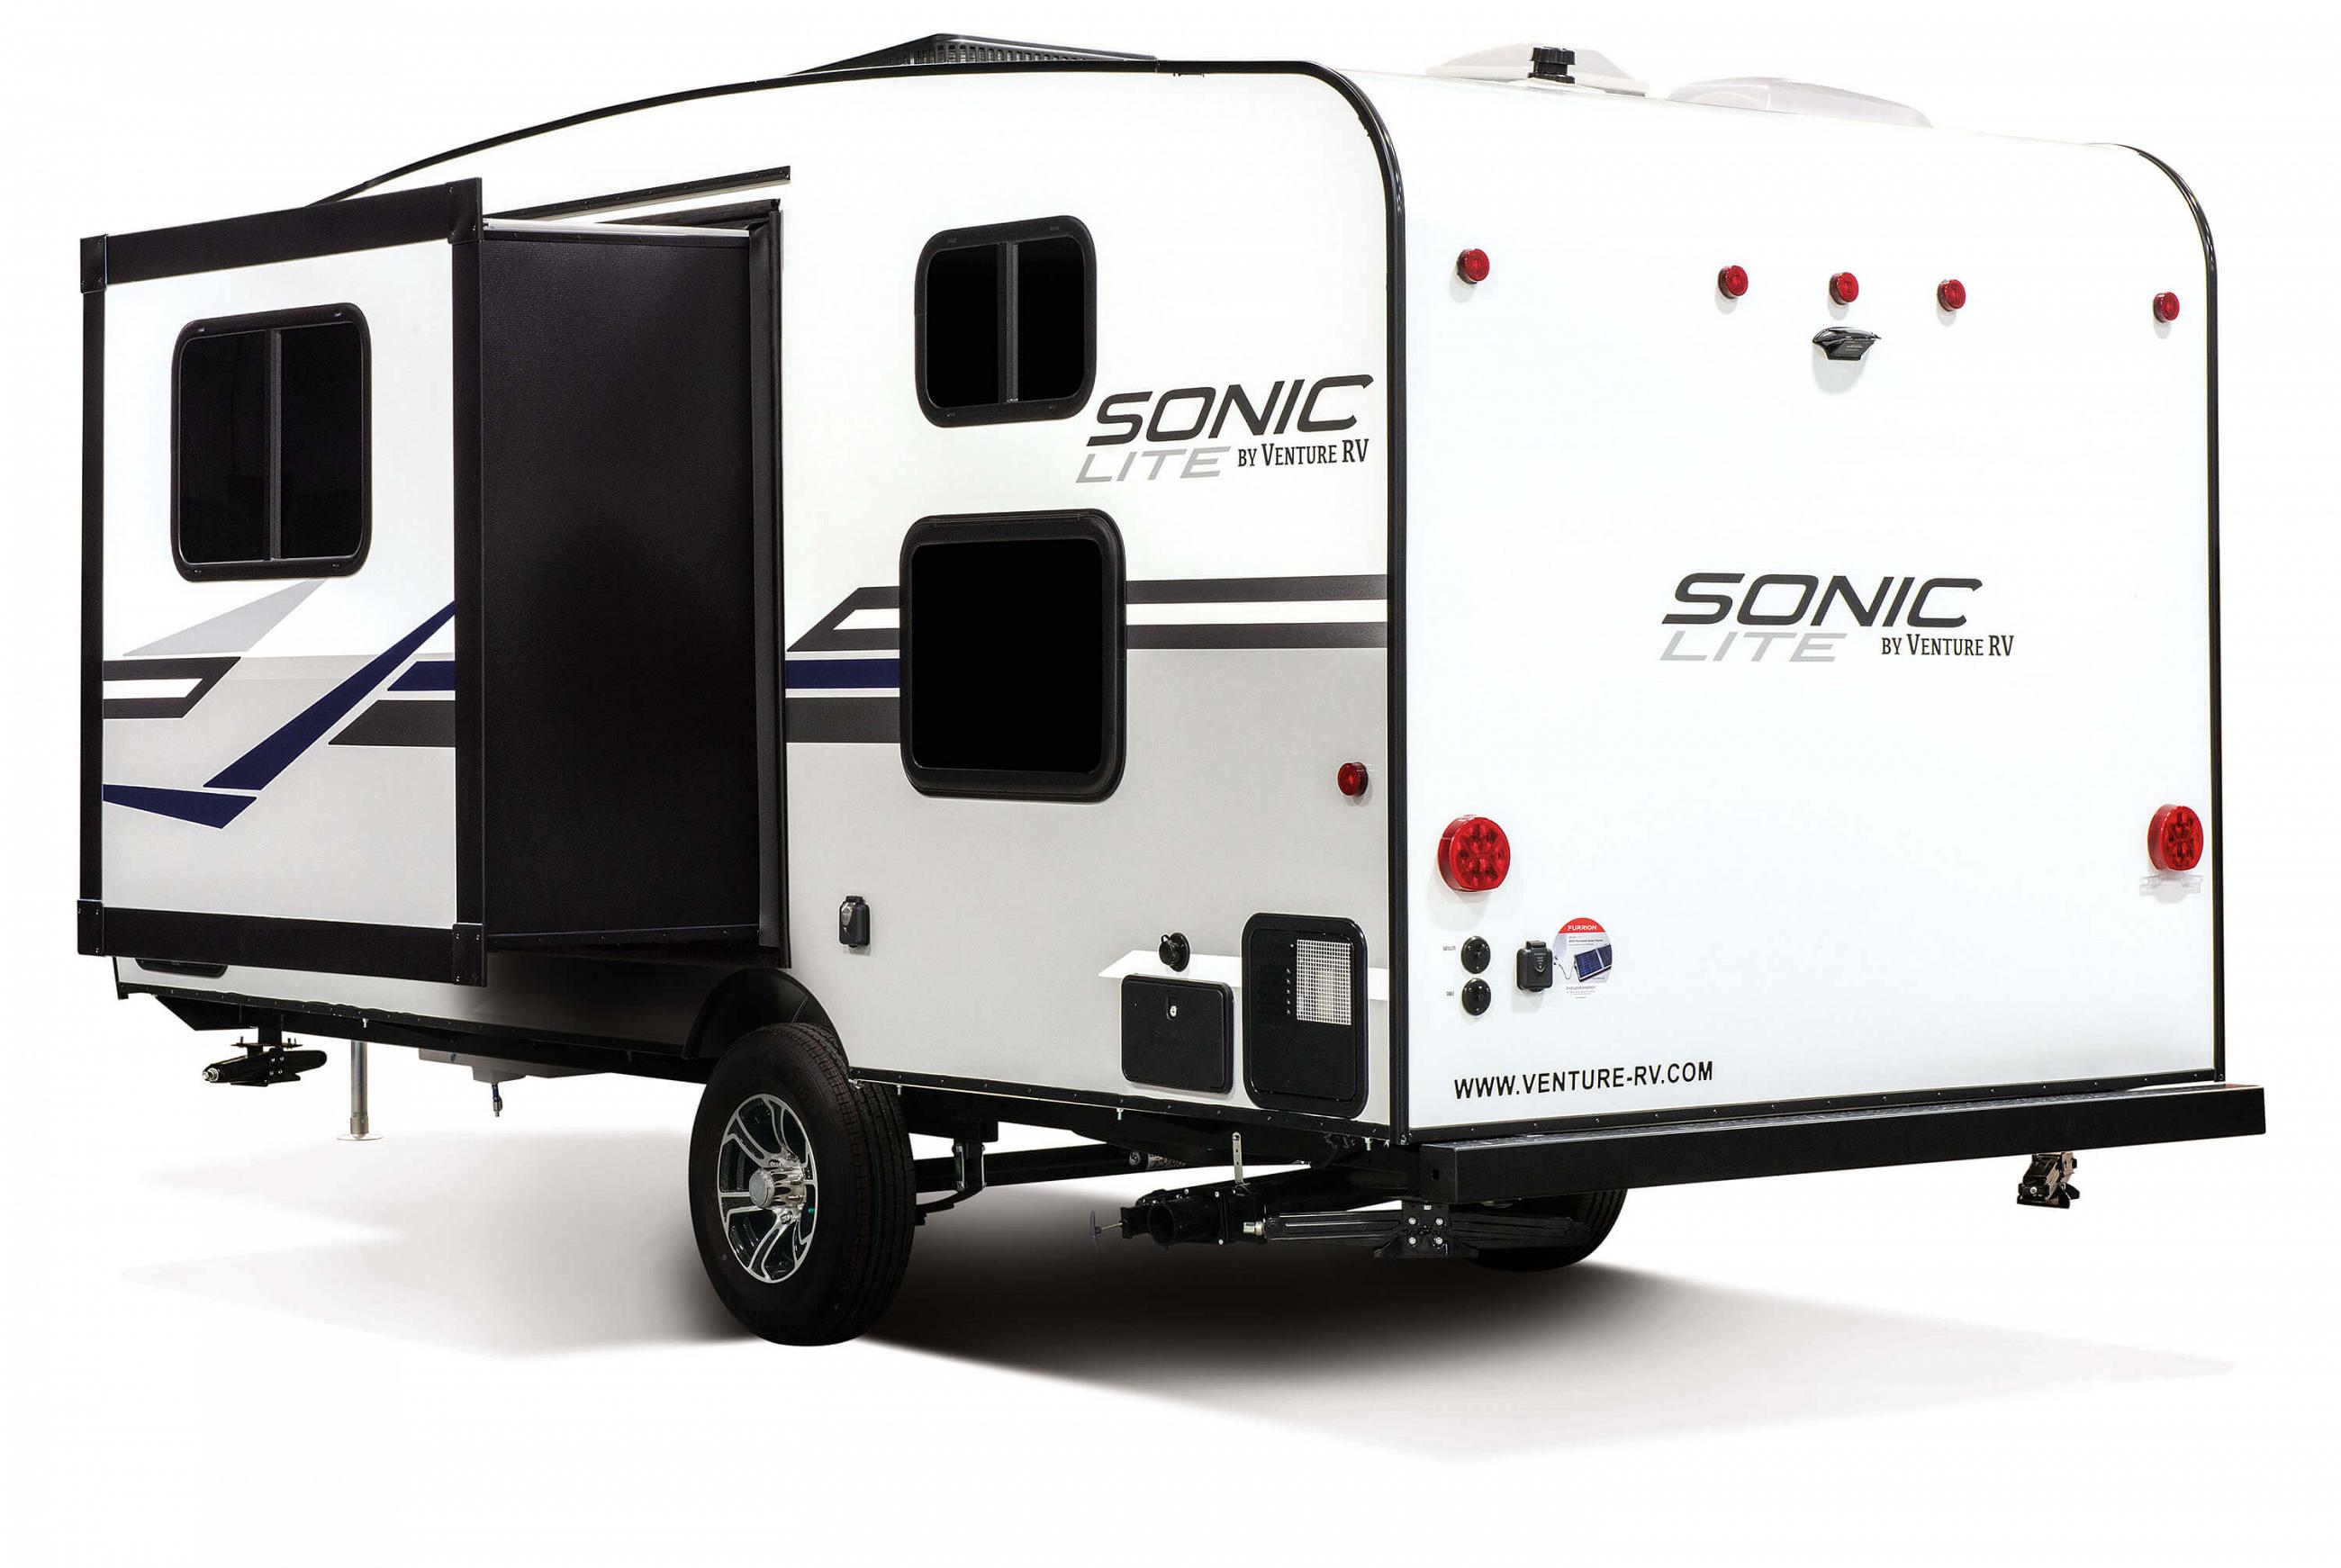 Sonic Lite Travel Trailer 28 Improved My DESIGN In One